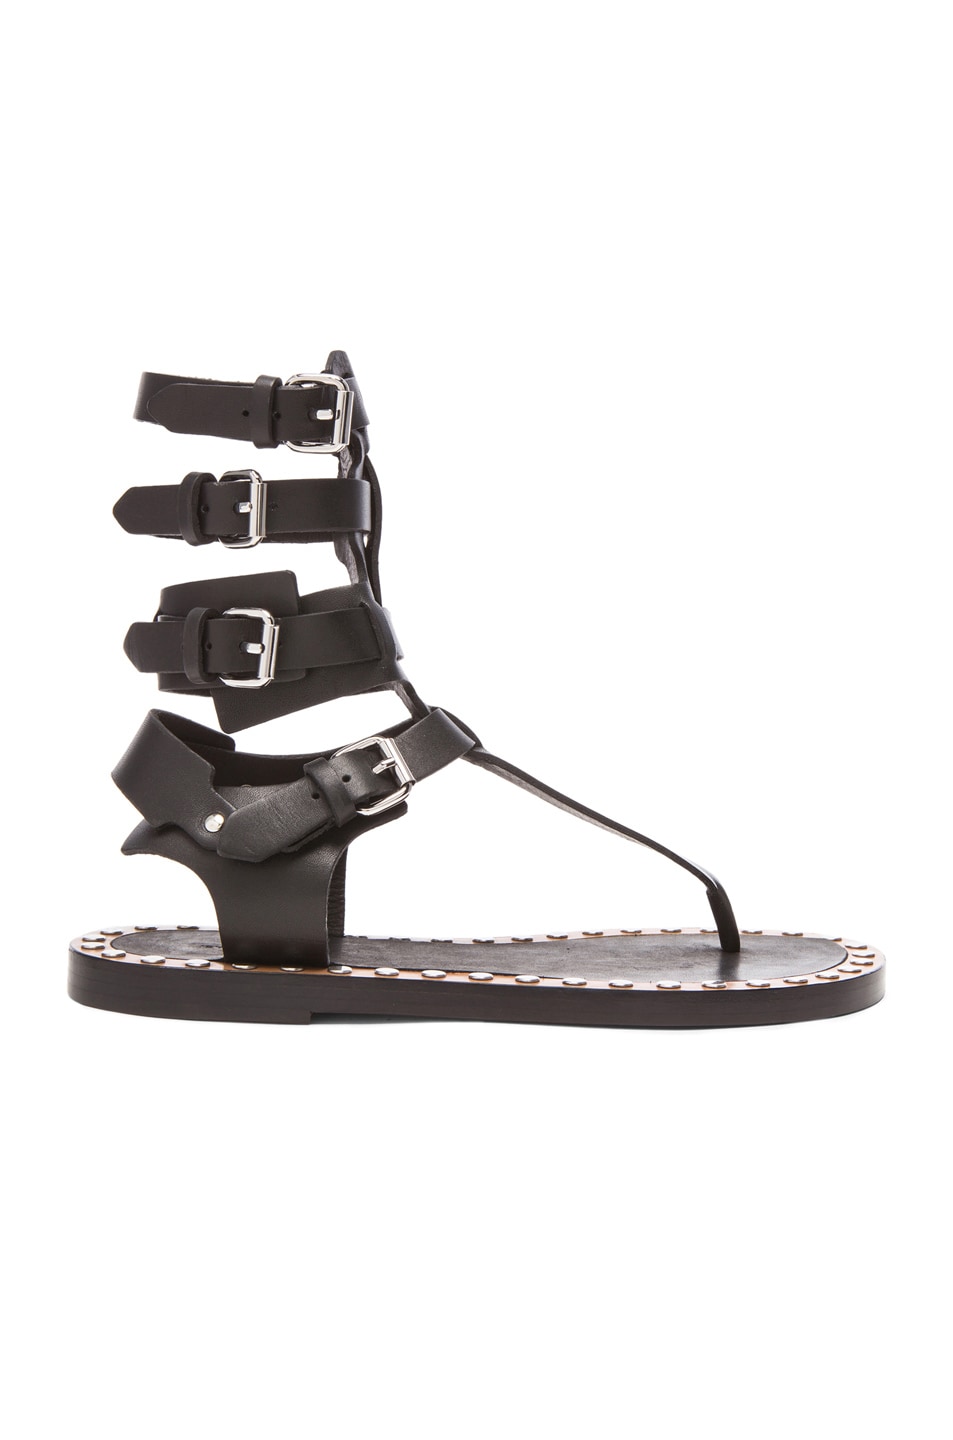 Isabel Marant Jeepy Circus Maximus Calfskin Leather Sandals in Black | FWRD